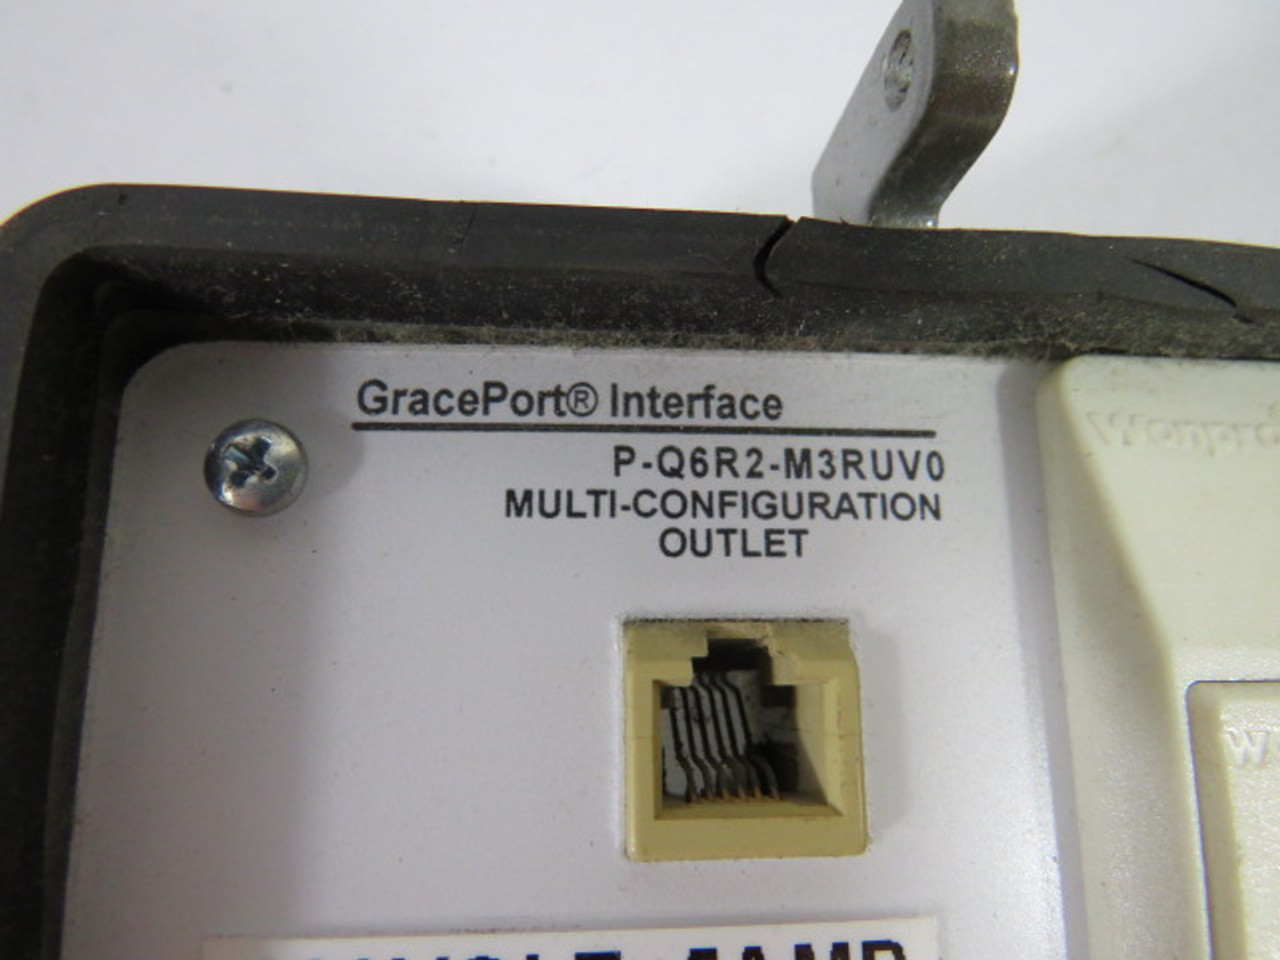 Graceport P-Q6R2-M3RUV0 Ethernet Universal Intl. Outlet USED